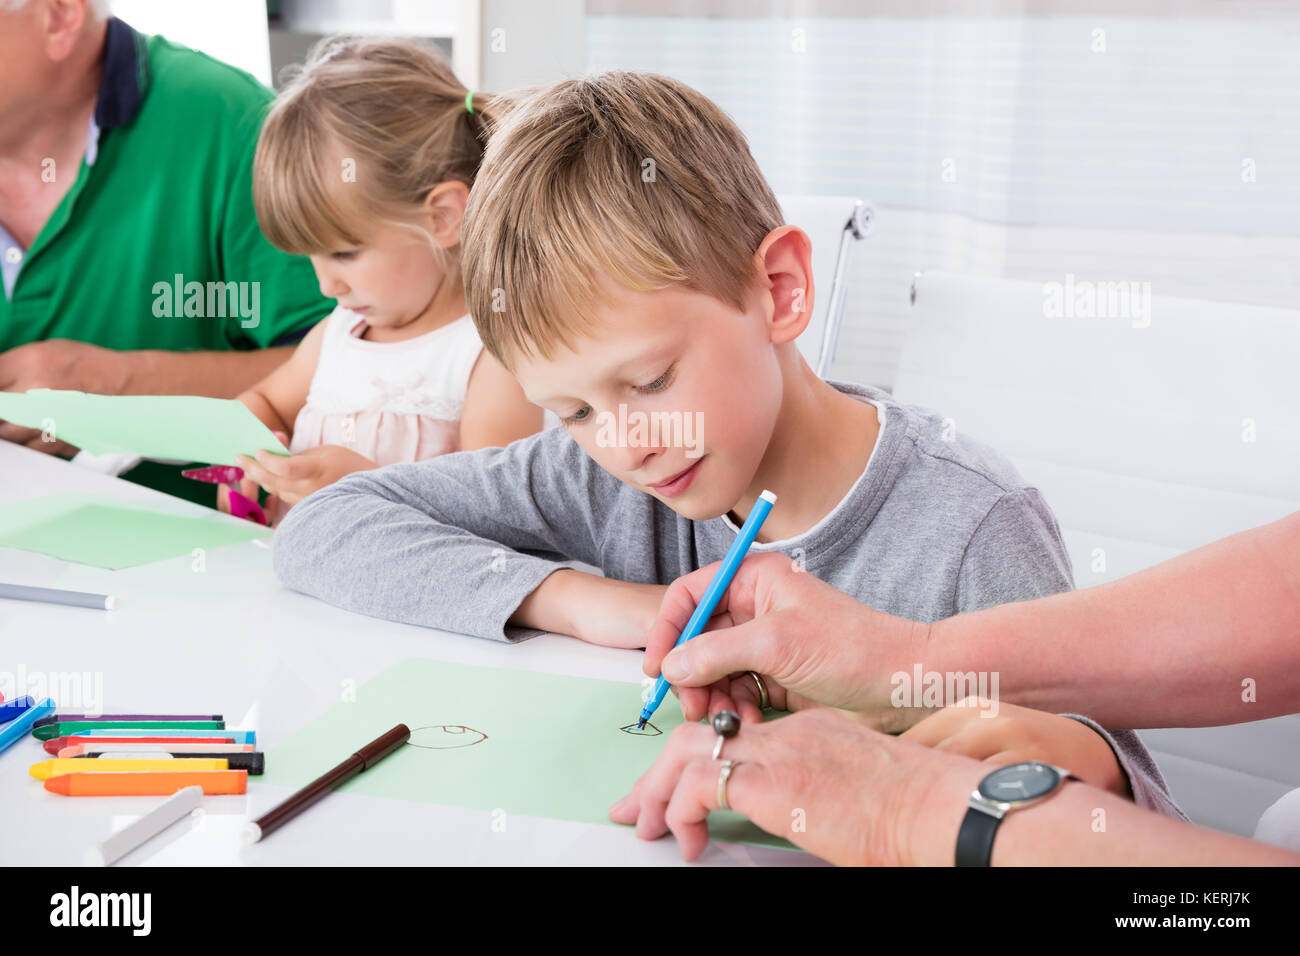 Grandparents Helping Their Grandchildren To Draw On Colorful Paper At Home Stock Photo